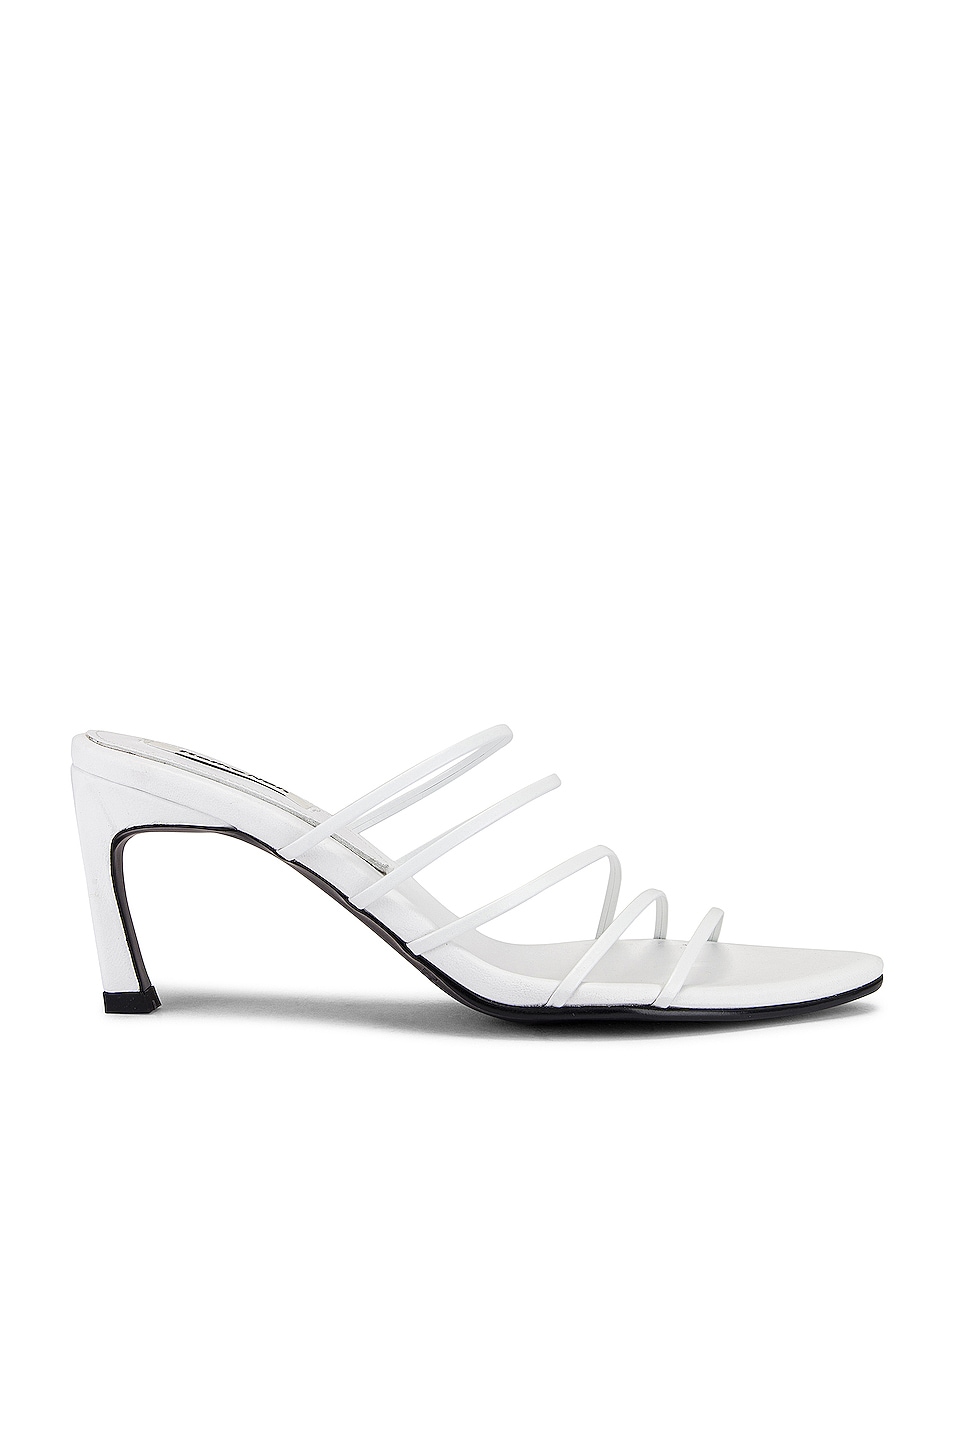 Image 1 of Reike Nen 5 Strings Pointed Sandals in White